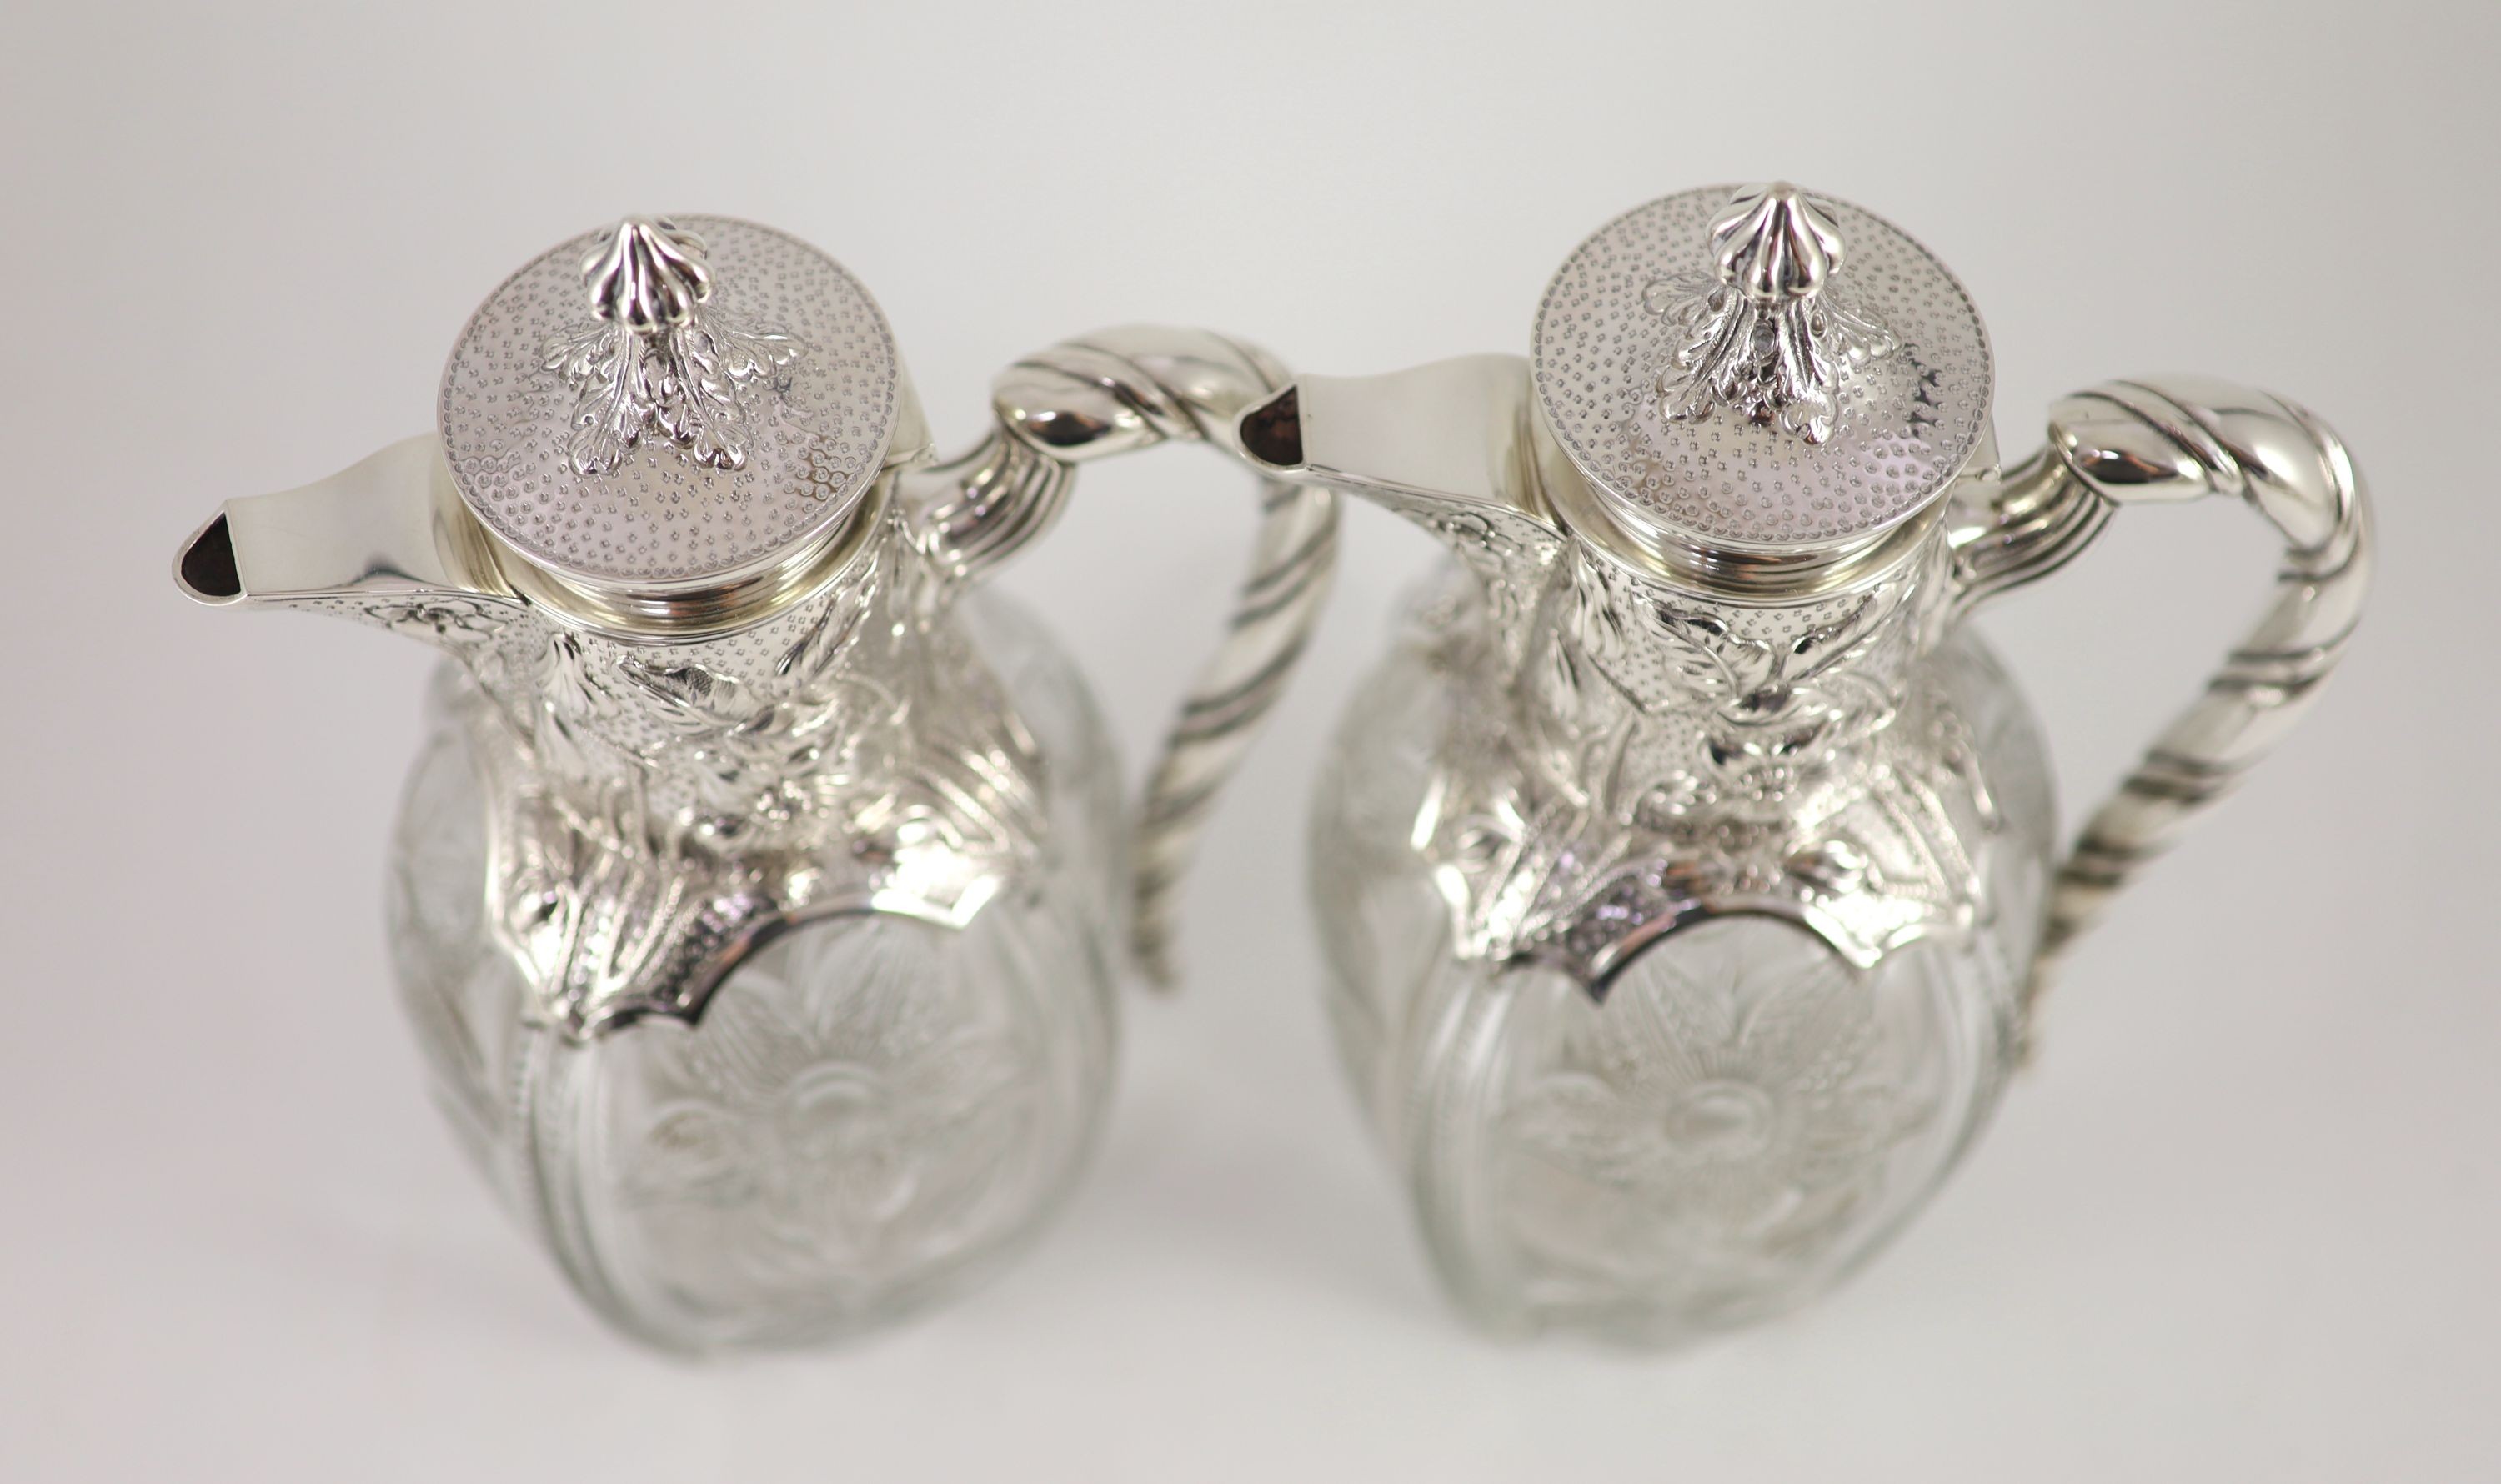 A good pair of late Victorian silver mounted ‘rock crystal’ glass claret jugs, with hinged covers, by John Grinsell & Sons